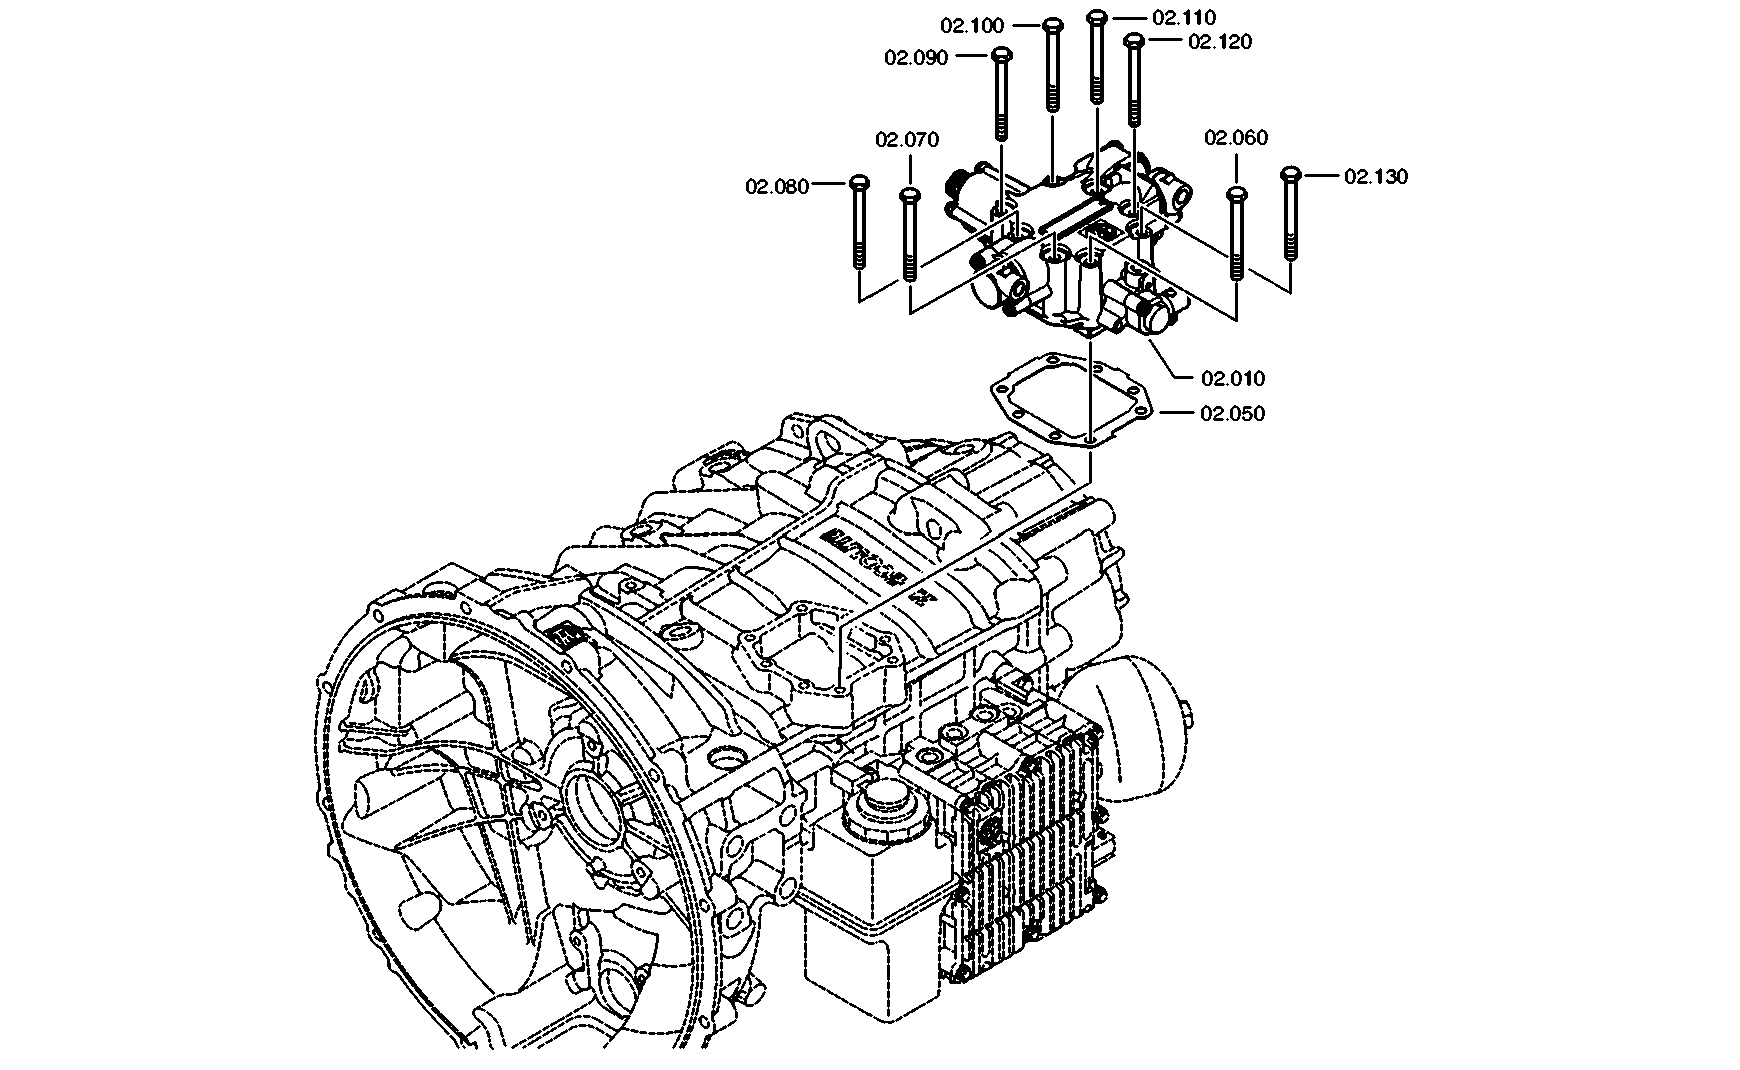 drawing for DAF 1780803 - TRANSMISSION ACTUATOR (figure 5)